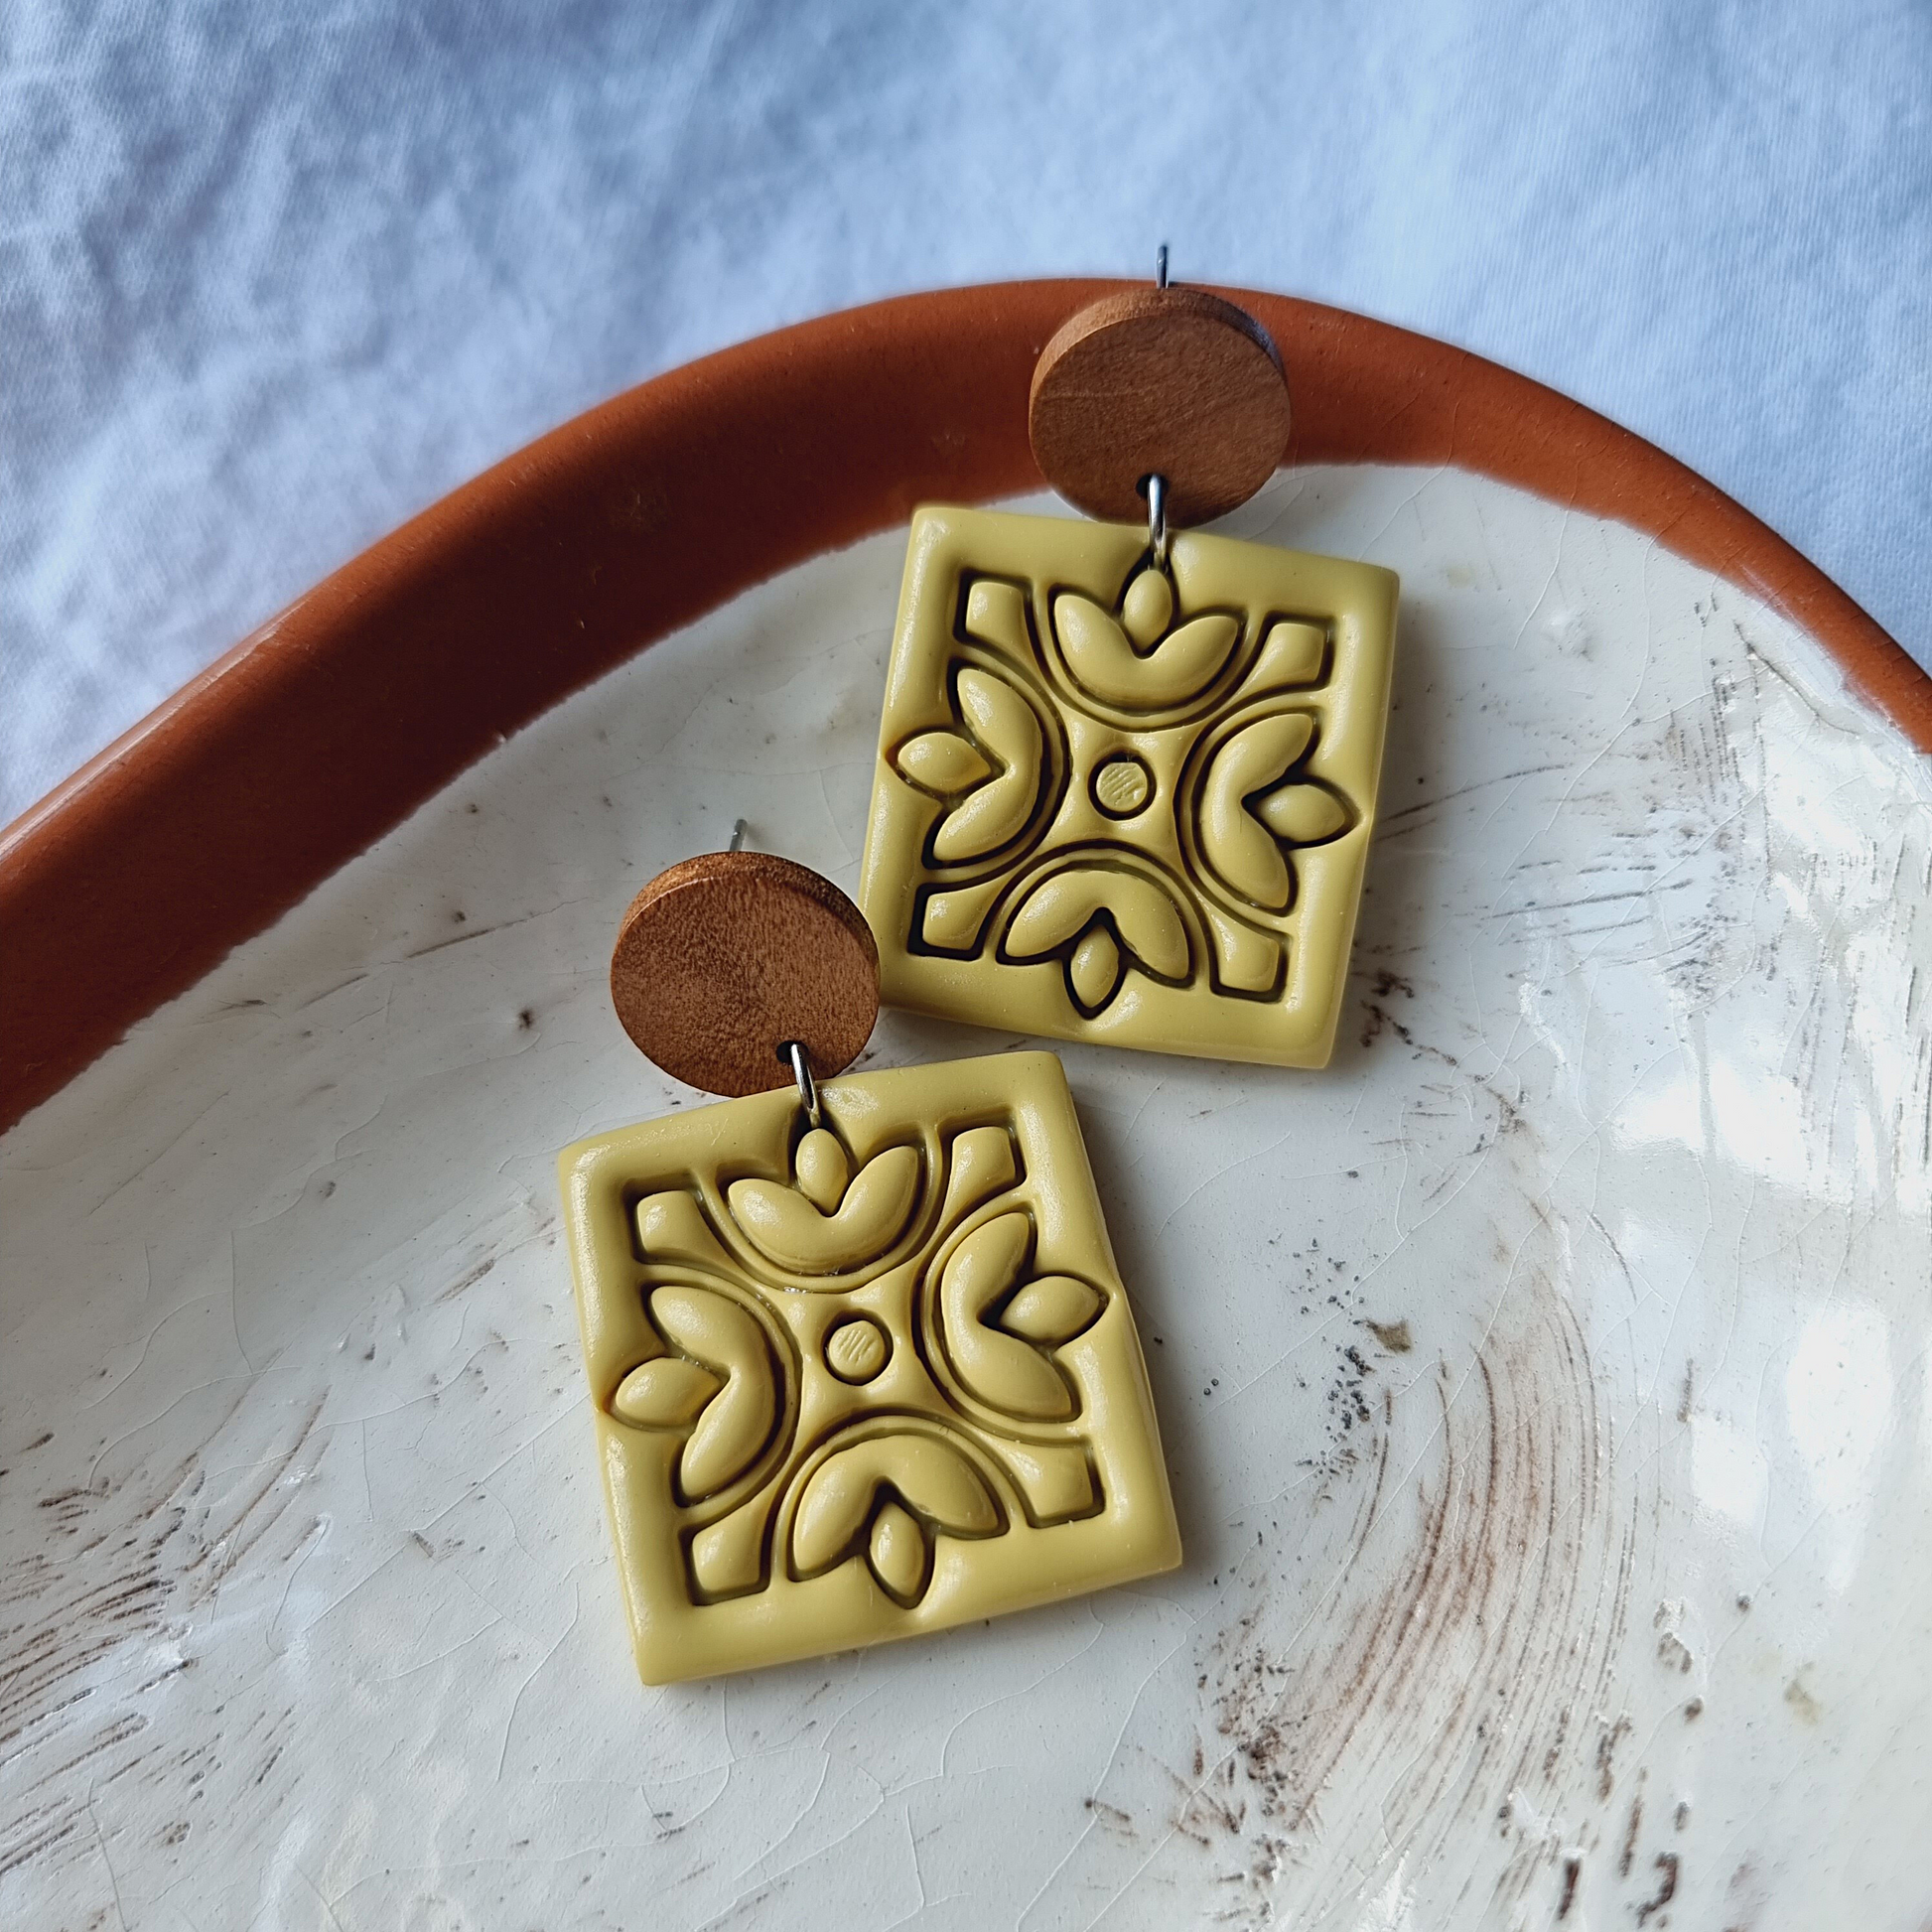 Experience love in every detail with our unique handmade square embossed polymer clay drop earrings. Adorned in a stunning earthy color, these 35mm x 35mm statement pieces feature walnut wood round ear studs with stainless steel pins. 